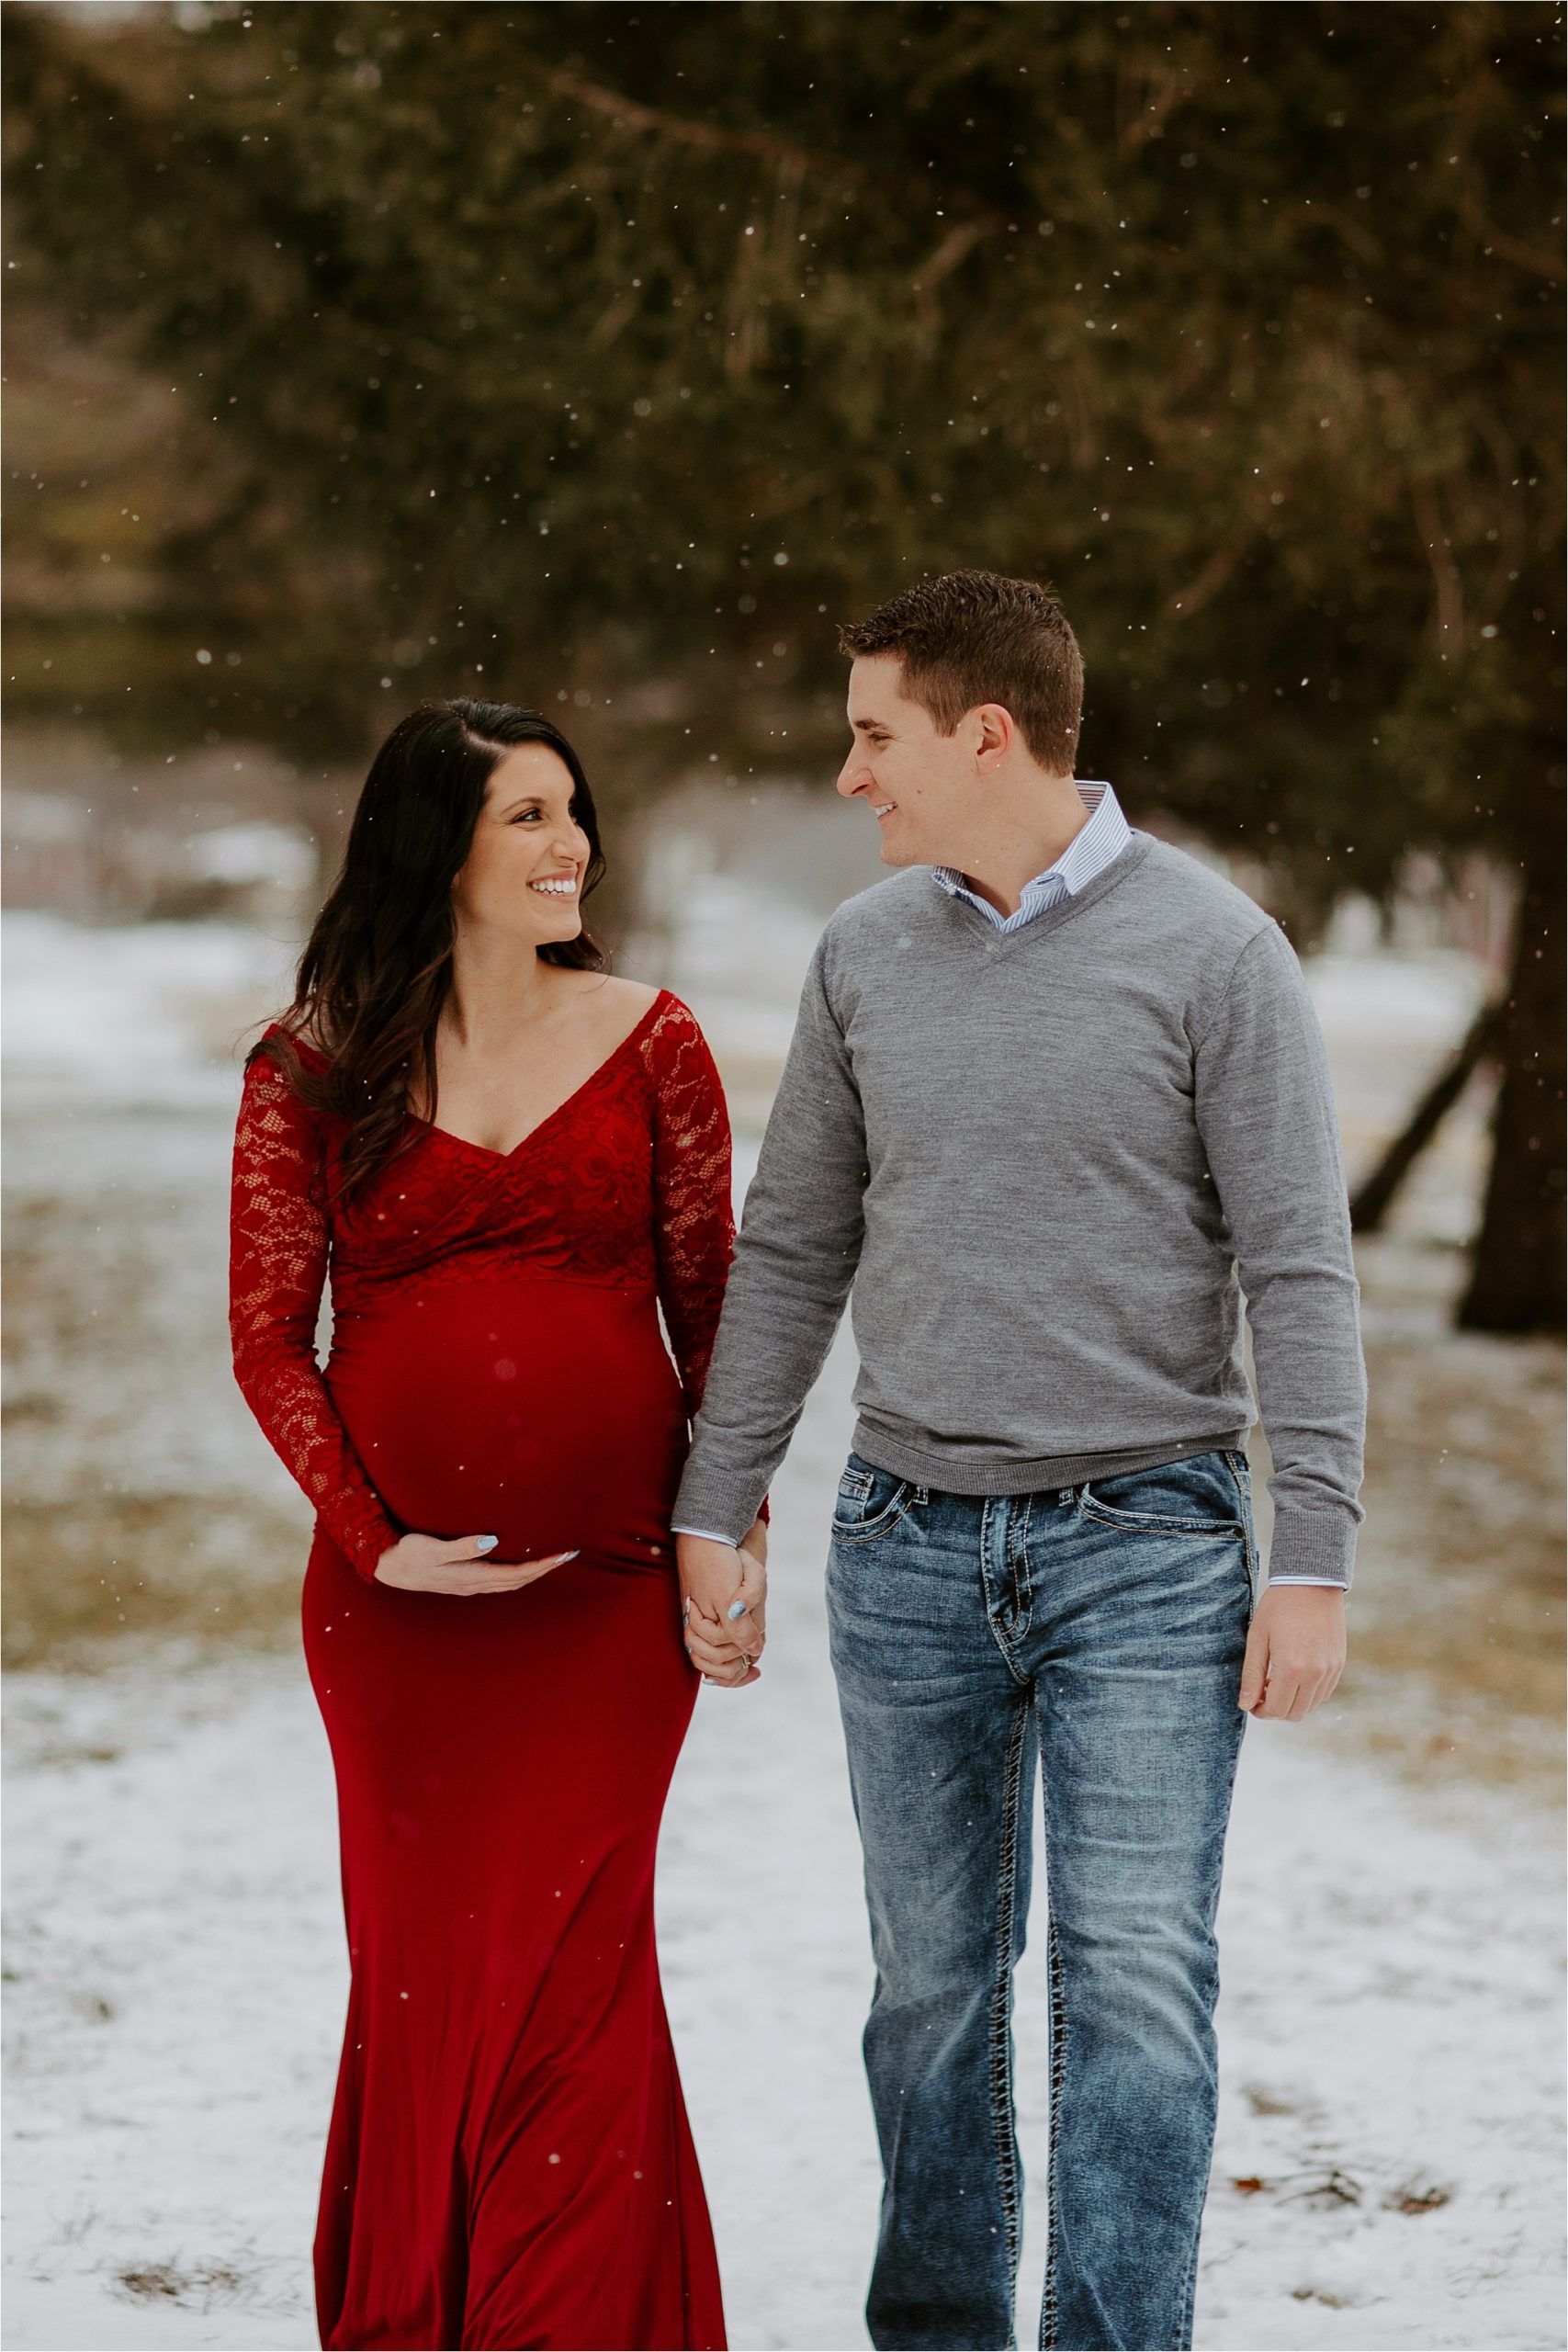 Pregnancy photoshoot in winter — Latest photography sessions